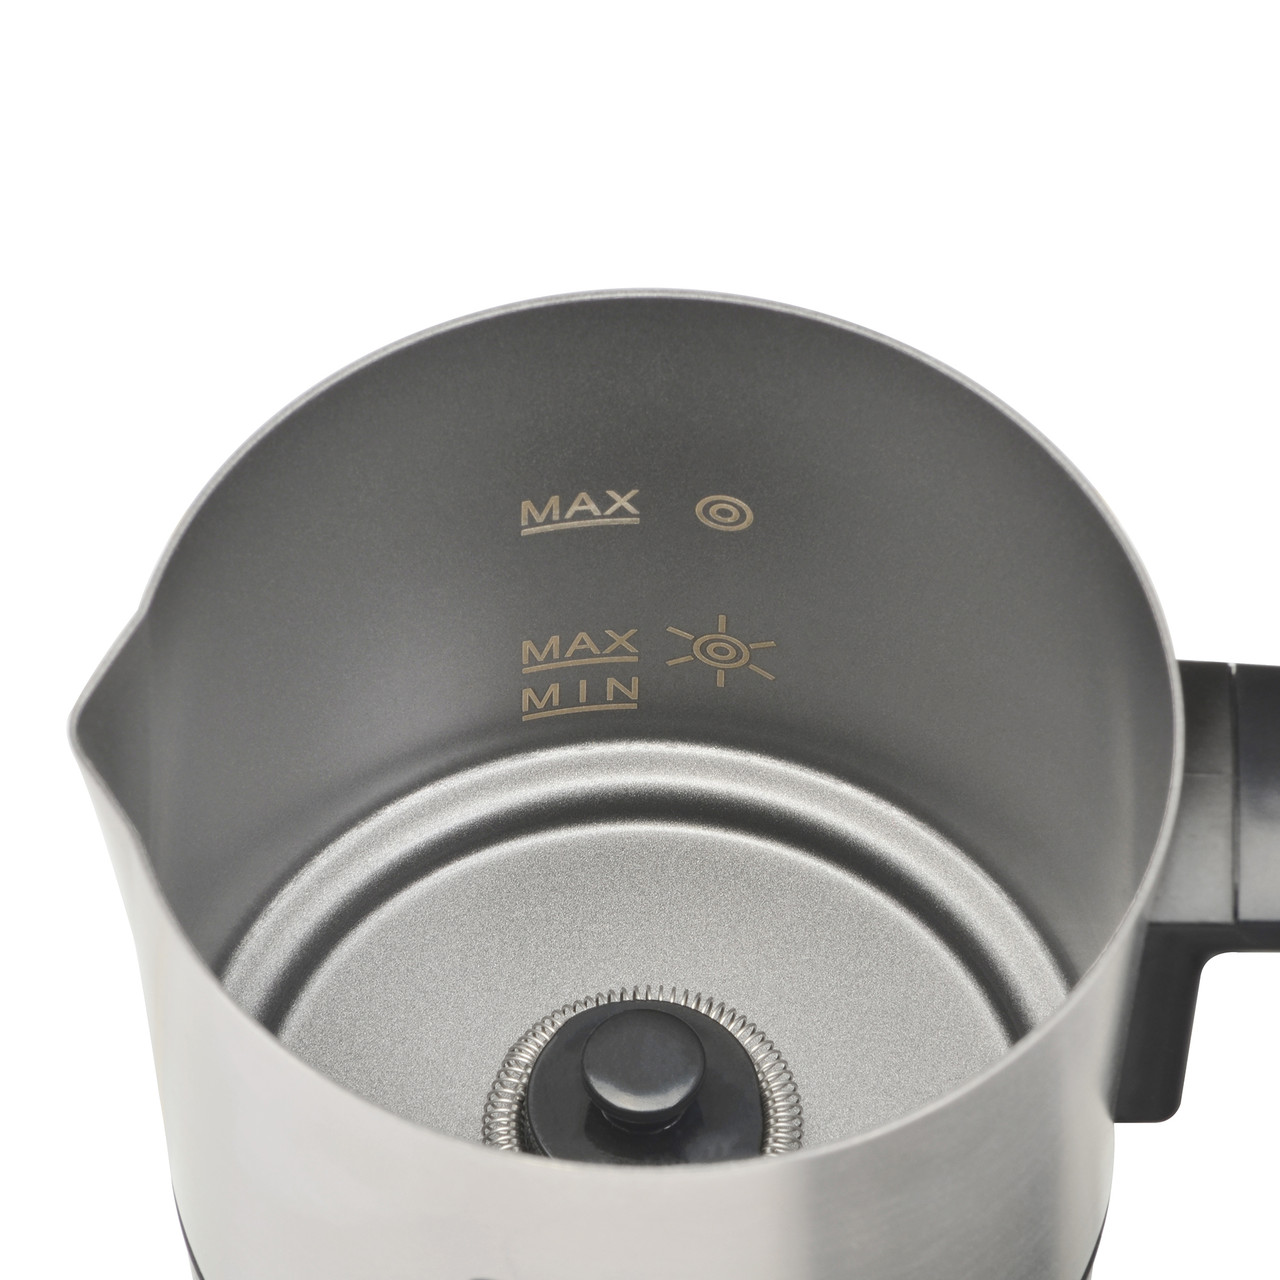 TRU Electric Milk Frother